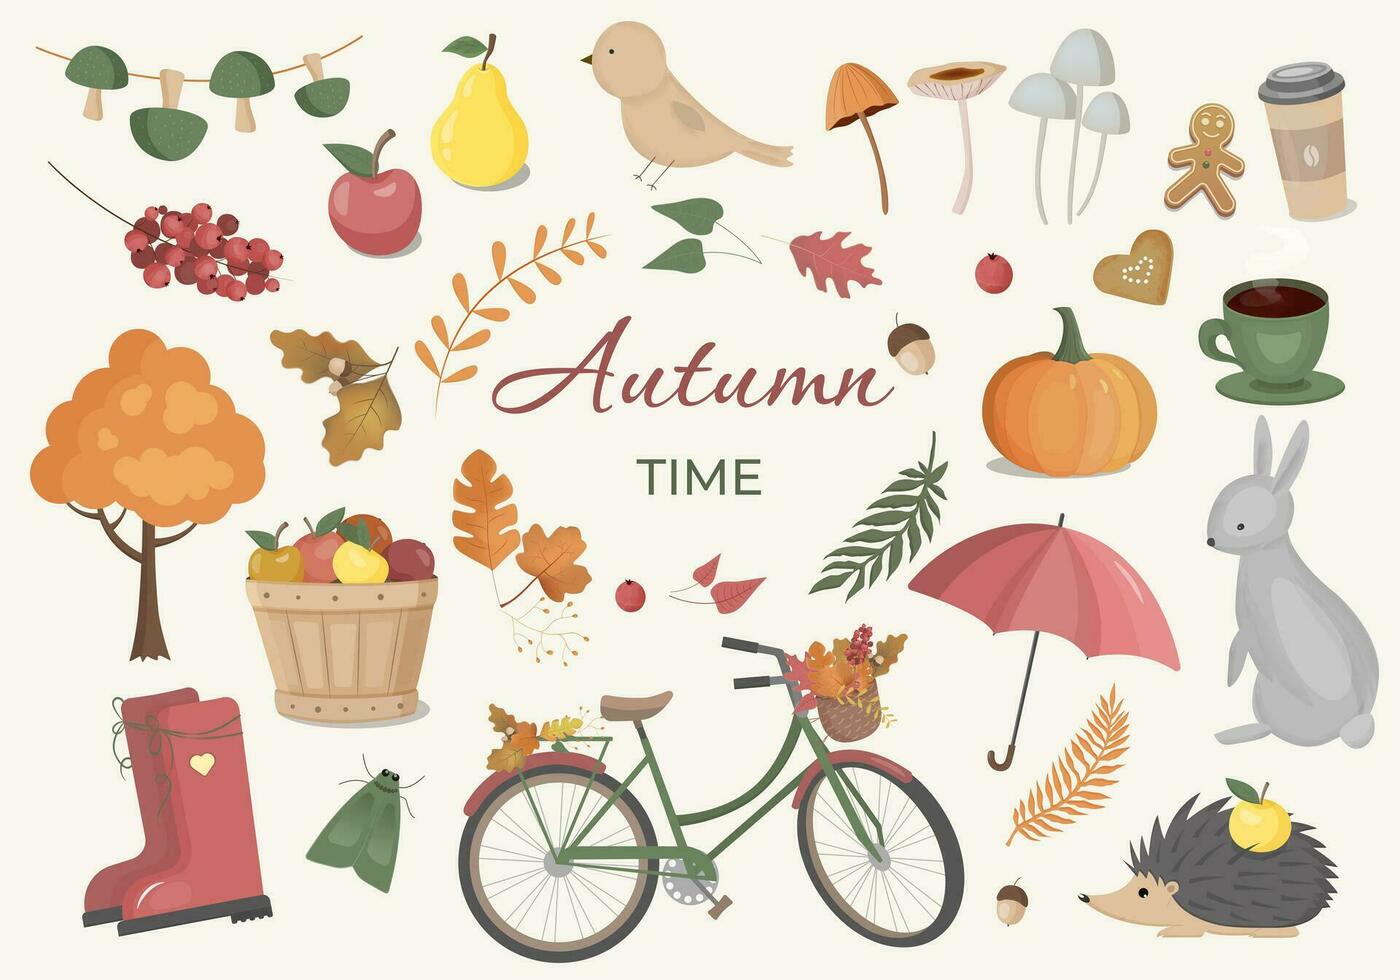 Vector collection with autumn elements. Autumn clipart set with leaves, pumpkin, forest animals and other symbols of fall.